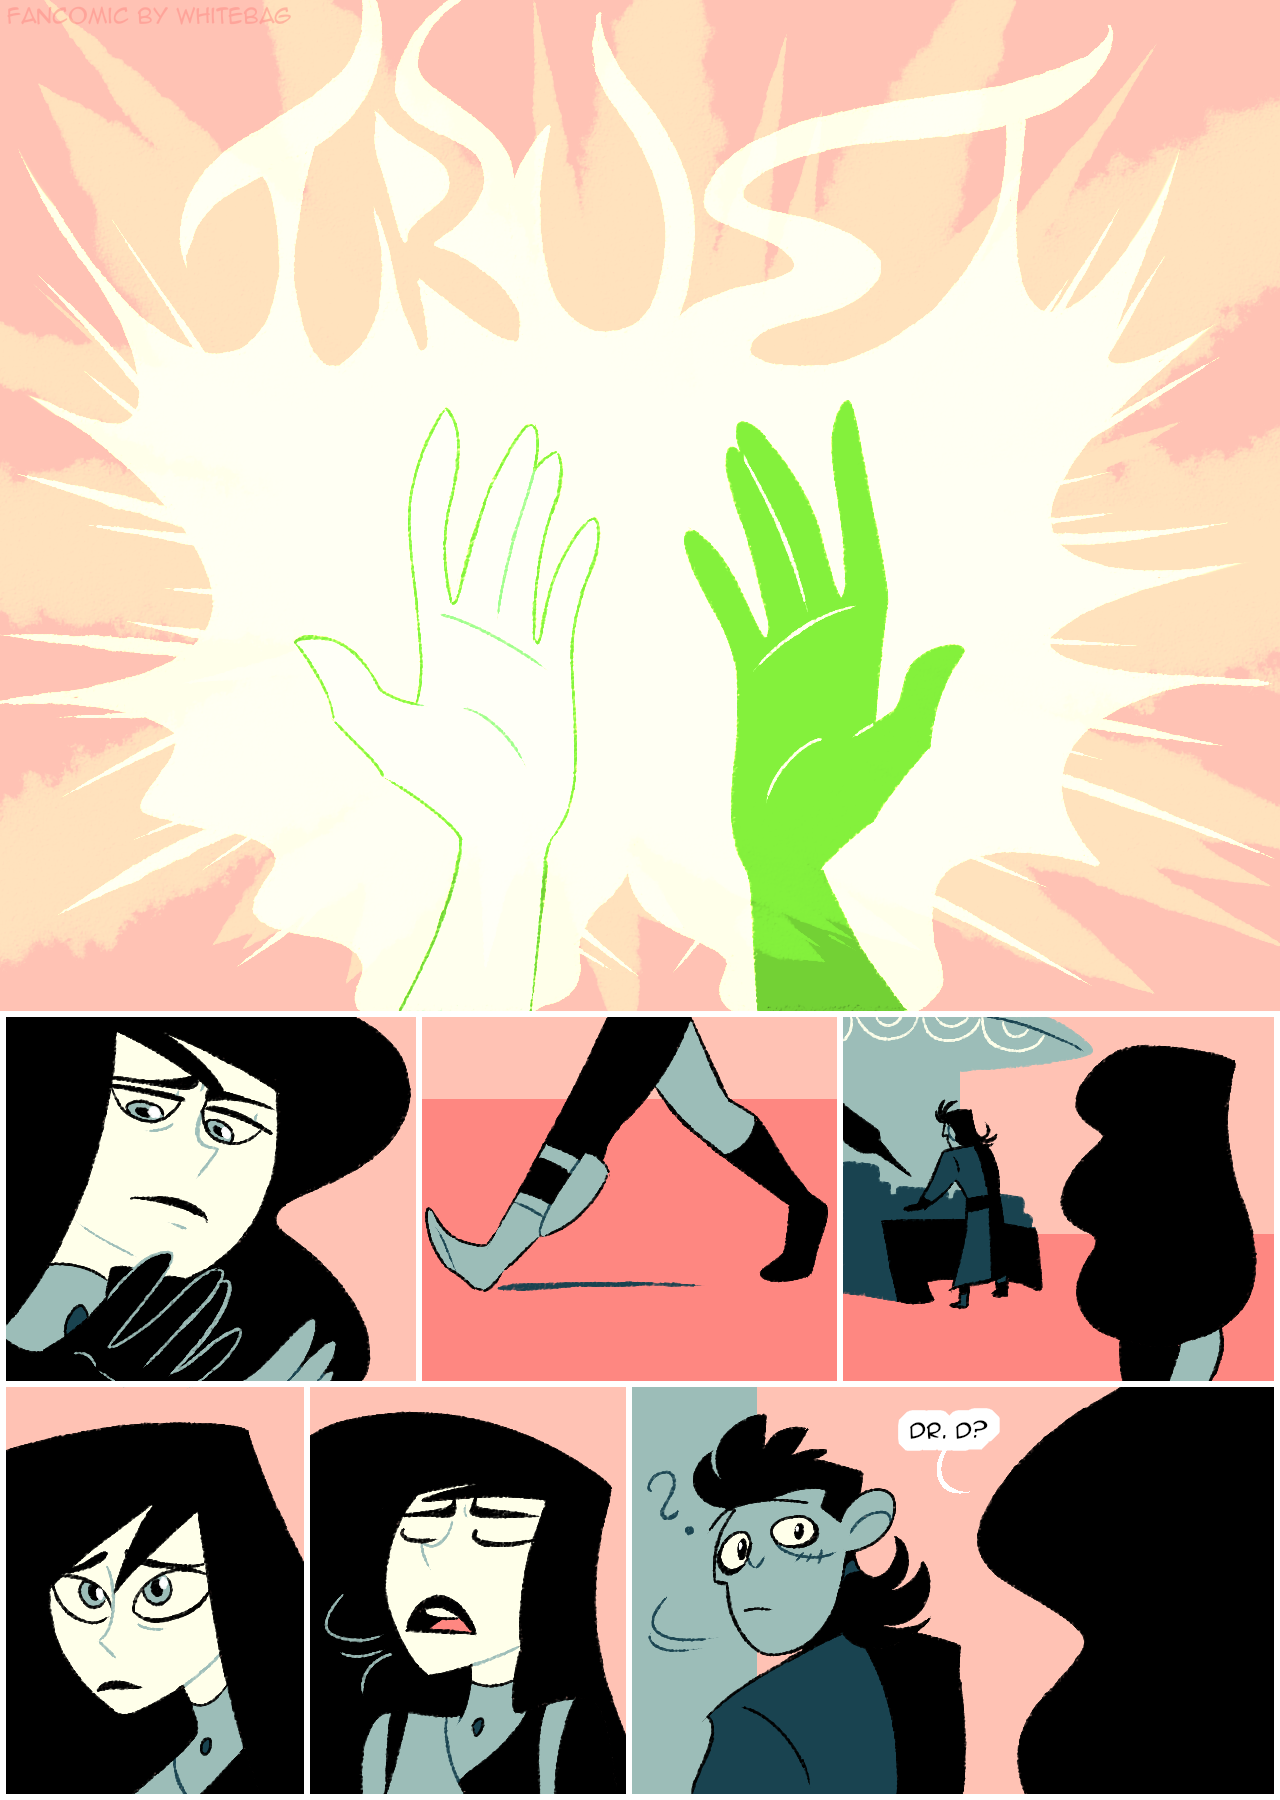 Your First Cousin Once Removed — A Kim Possible fan-comic about trust. I  recommend...